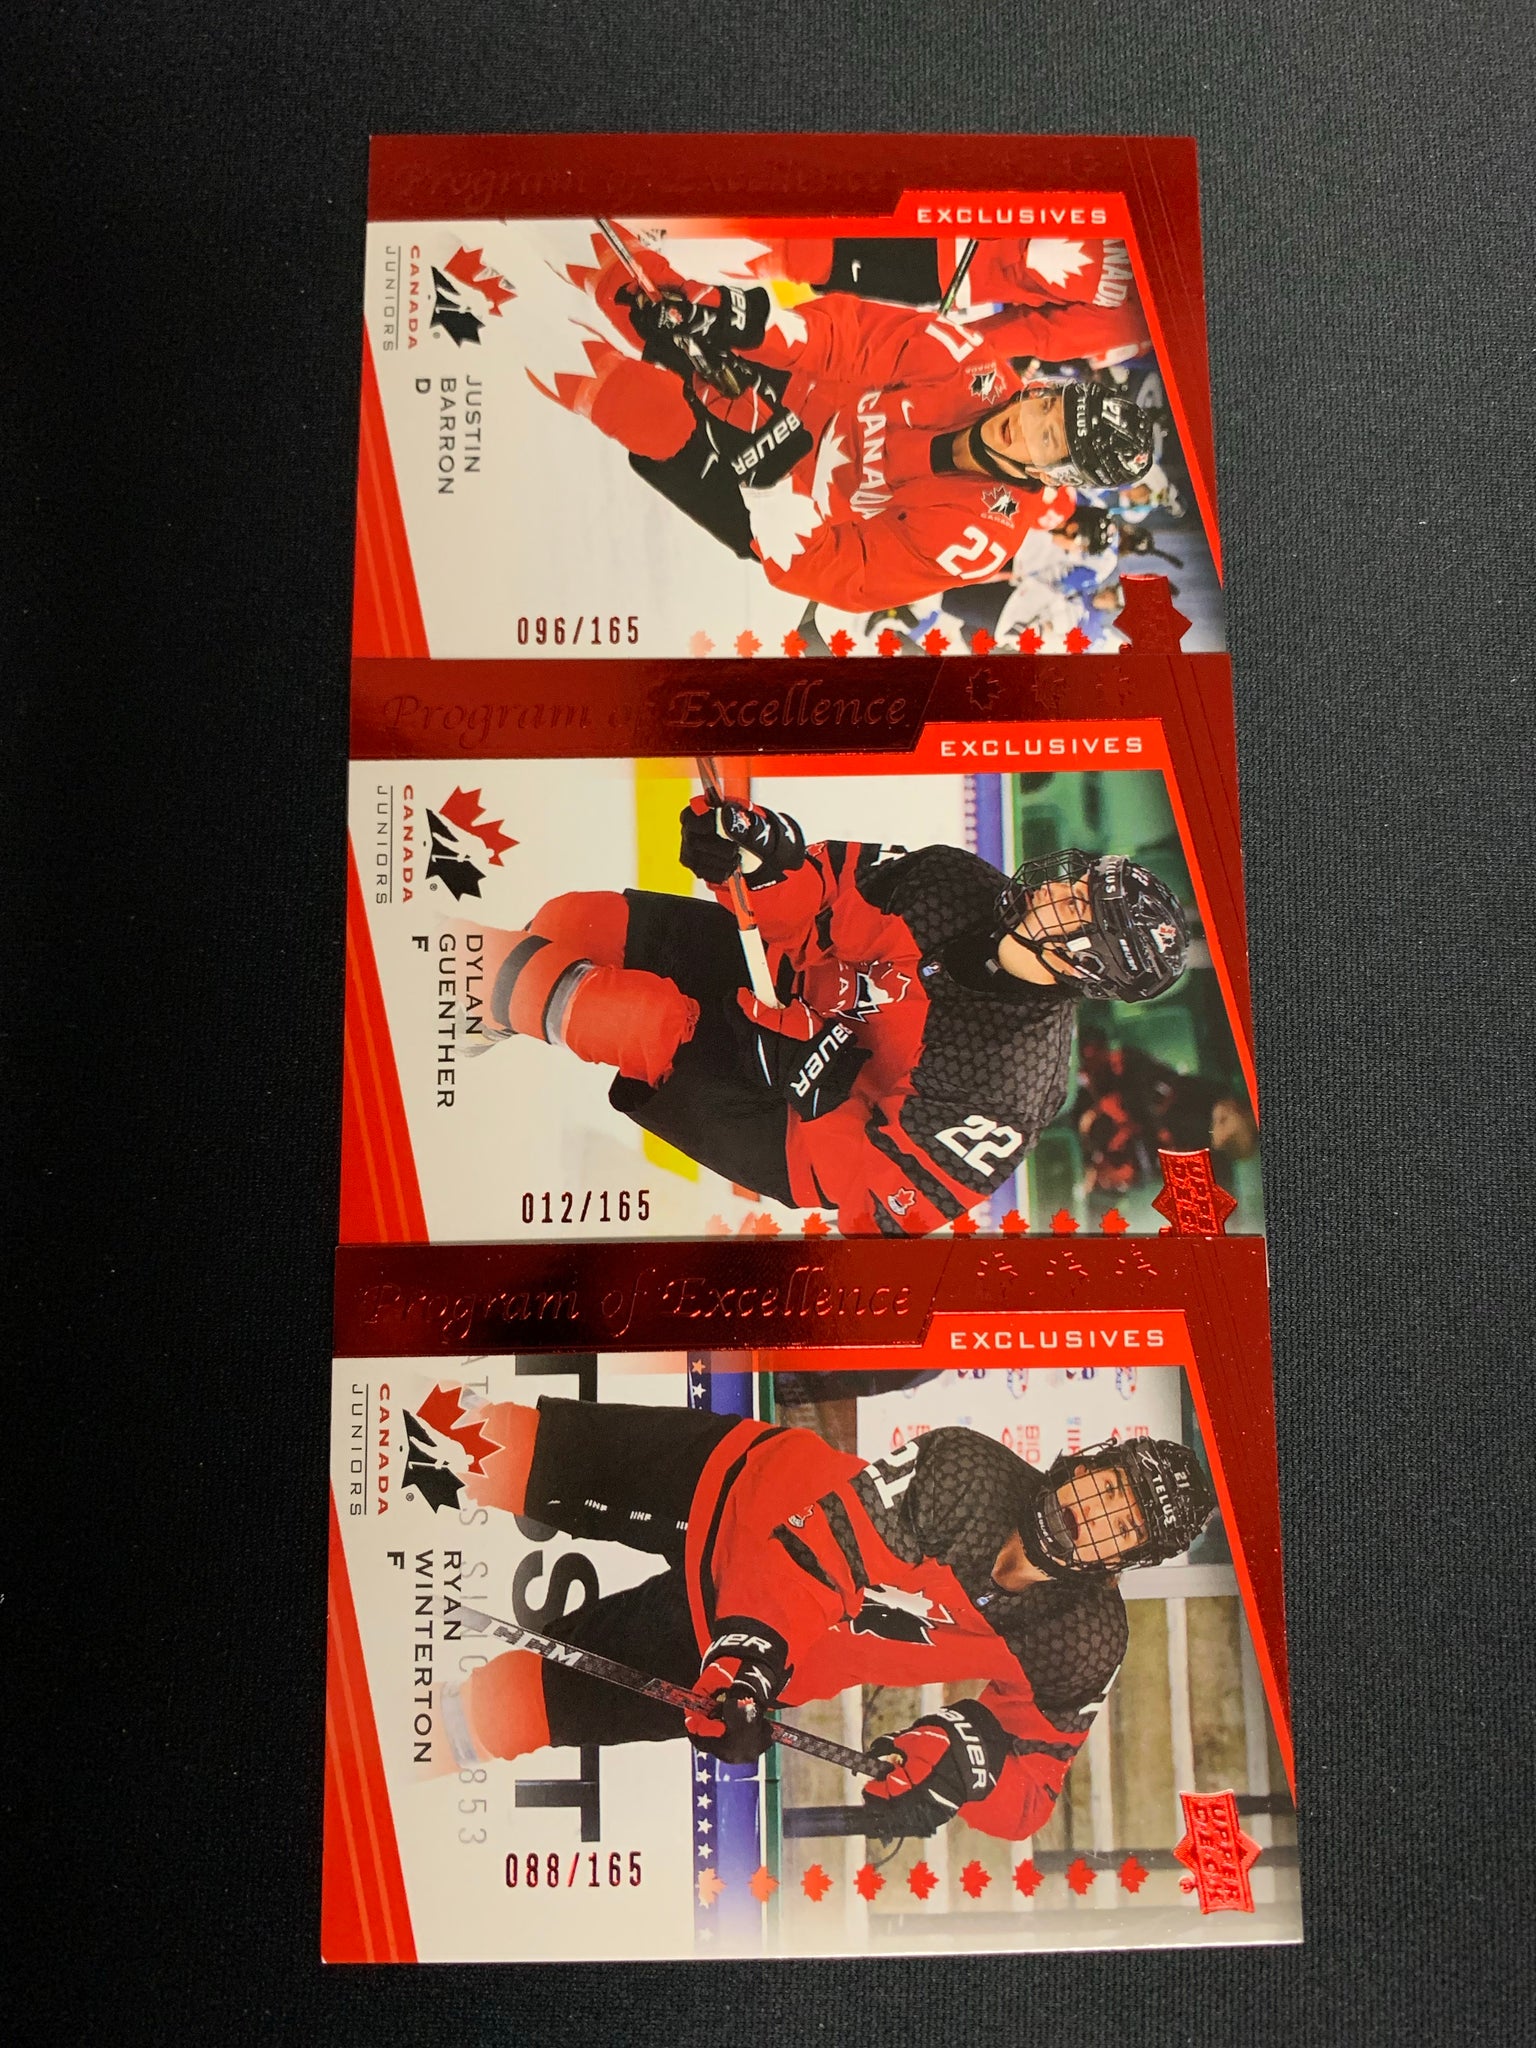 2021 UPPER DECK TEAM CANADA JUNIORS HOCKEY RED POE EXCLUSIXES LOT /165 - JUSTIN BARRON #111 , DYLAN GUENTHER #130 , RYAN WINTERTON #138